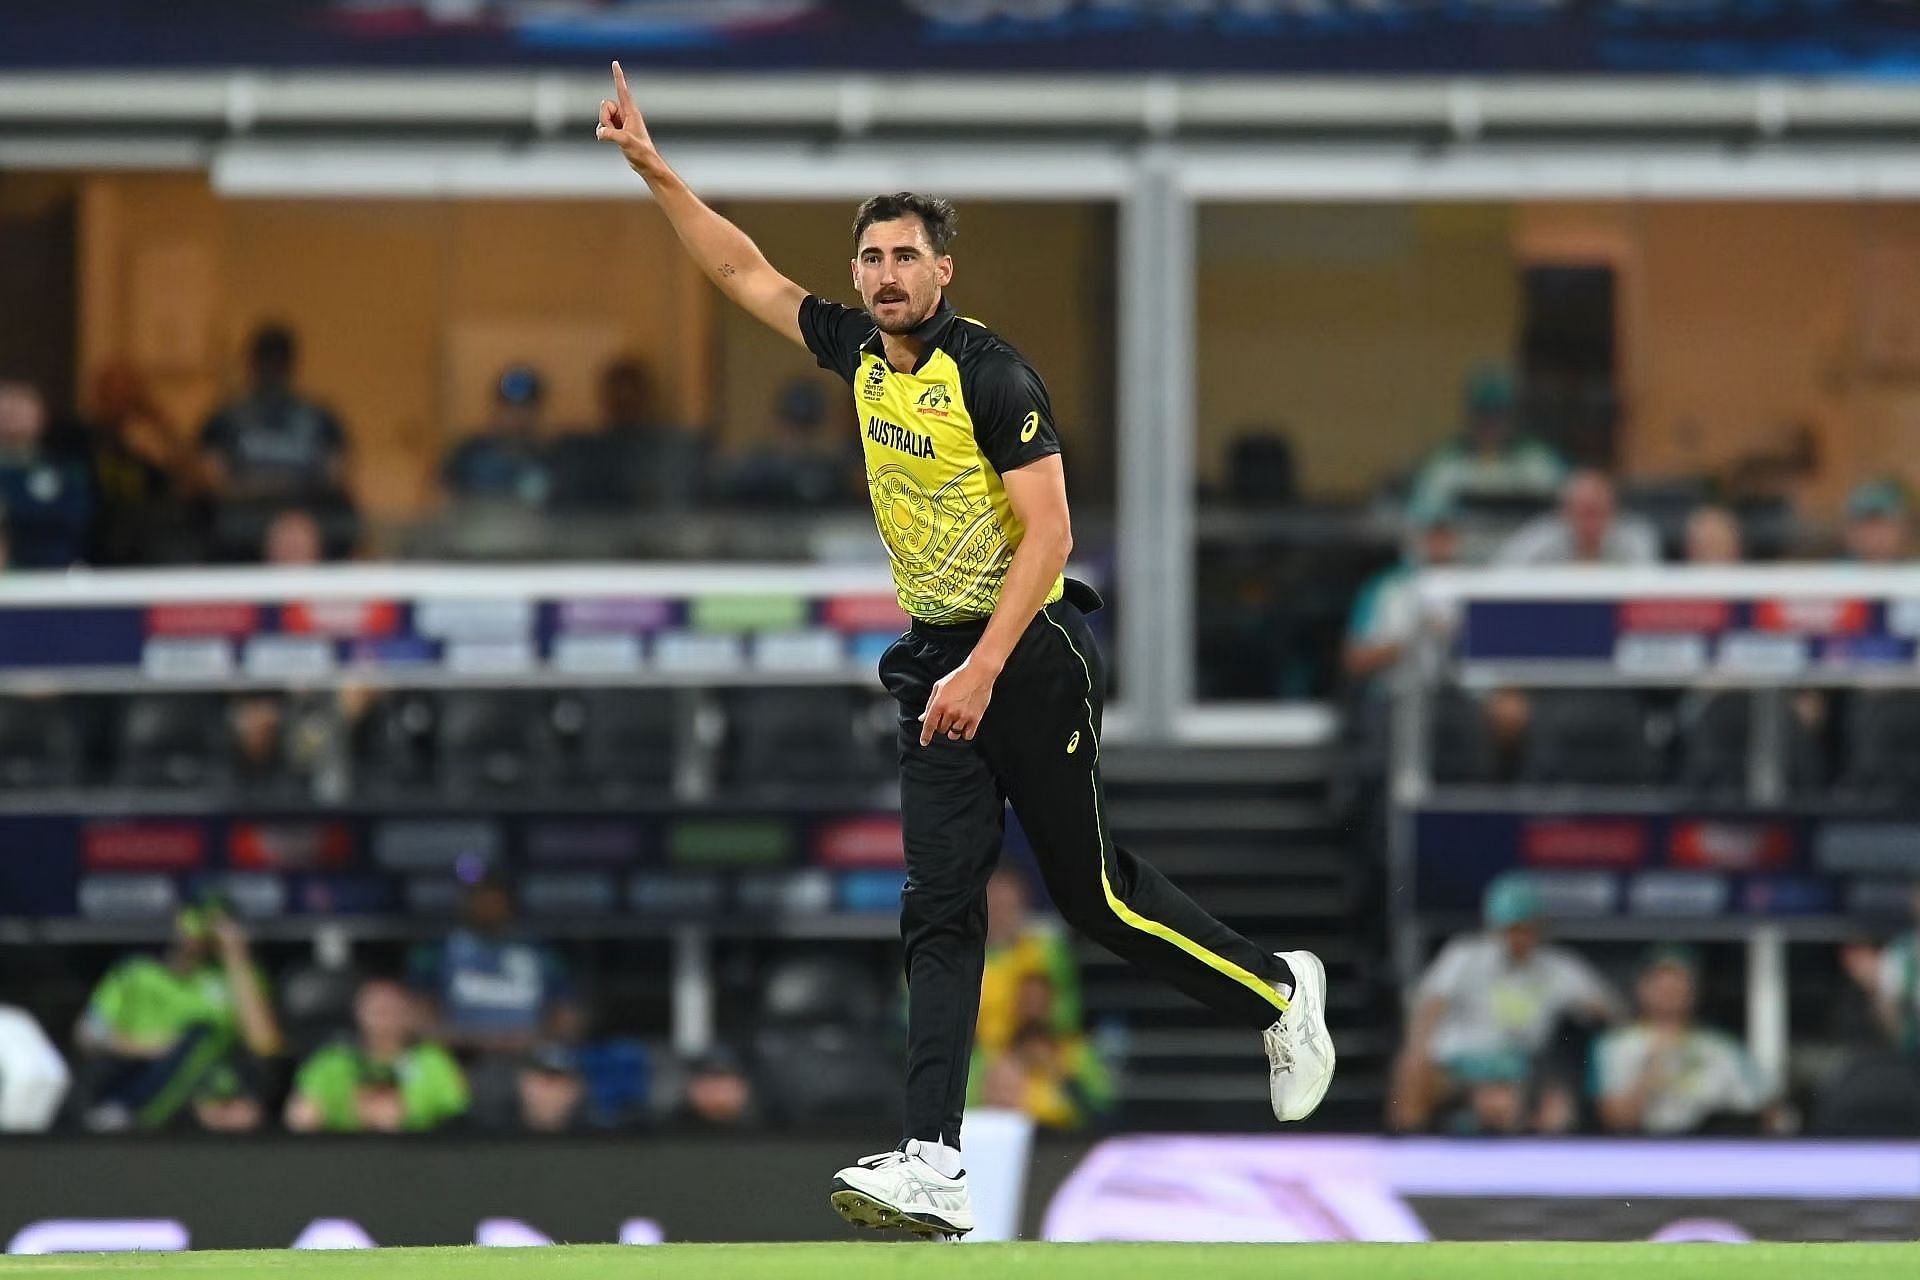 Mitchell Starc became the costliest buy in IPL auction history. [P/C: Getty]